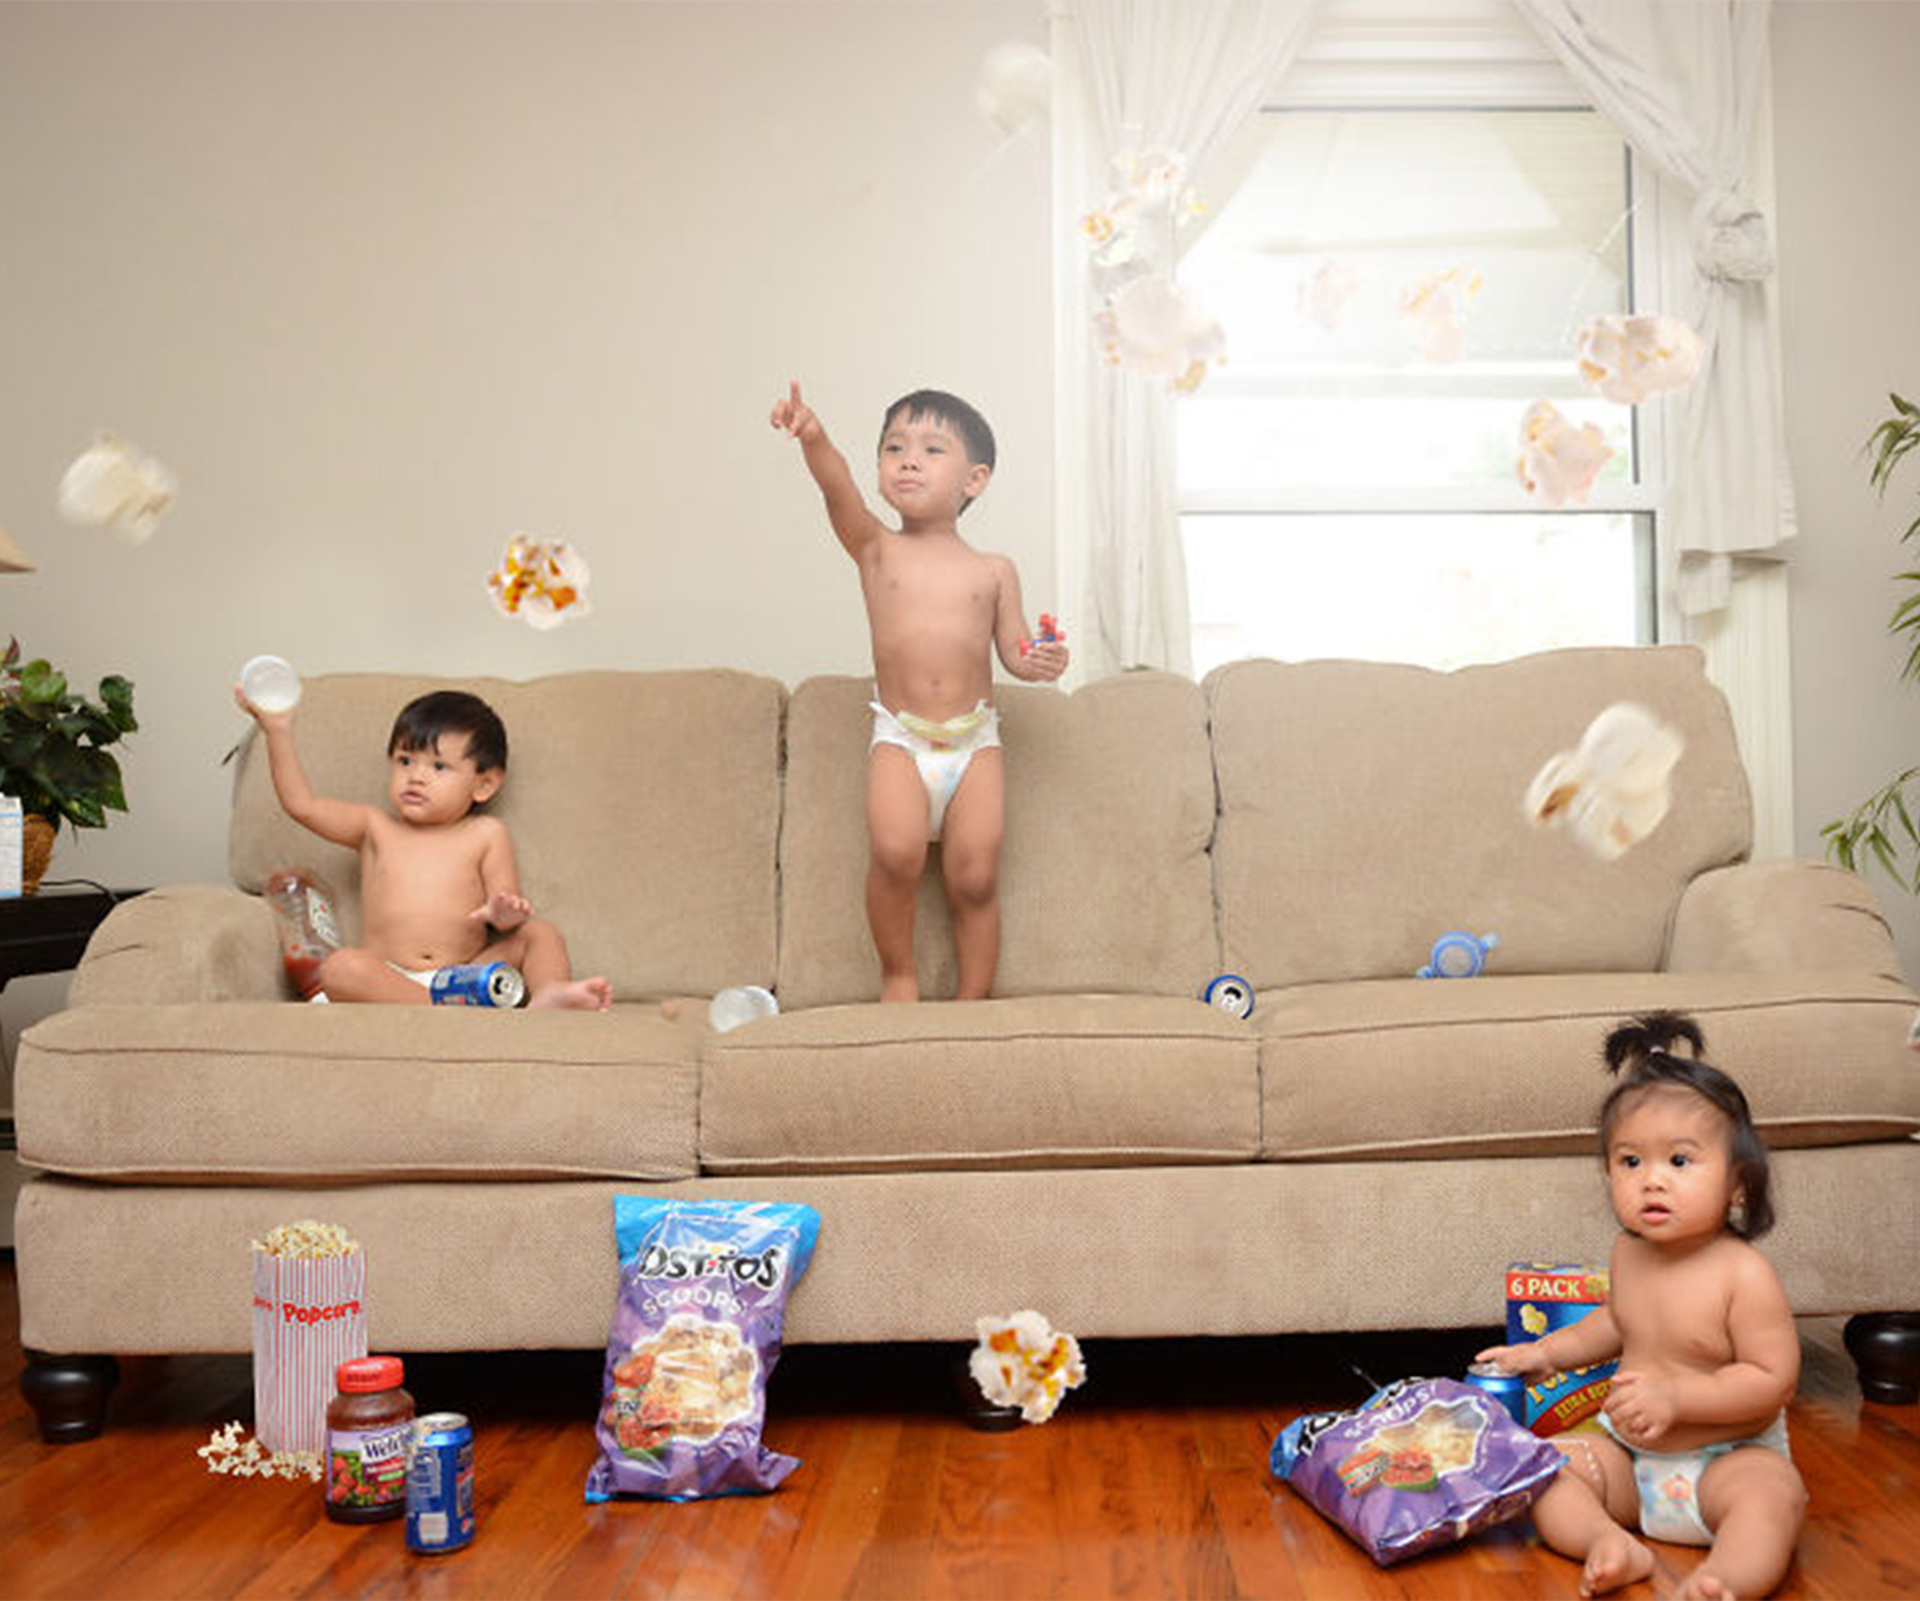 Artist shares amazing portraits from day as a babysitter